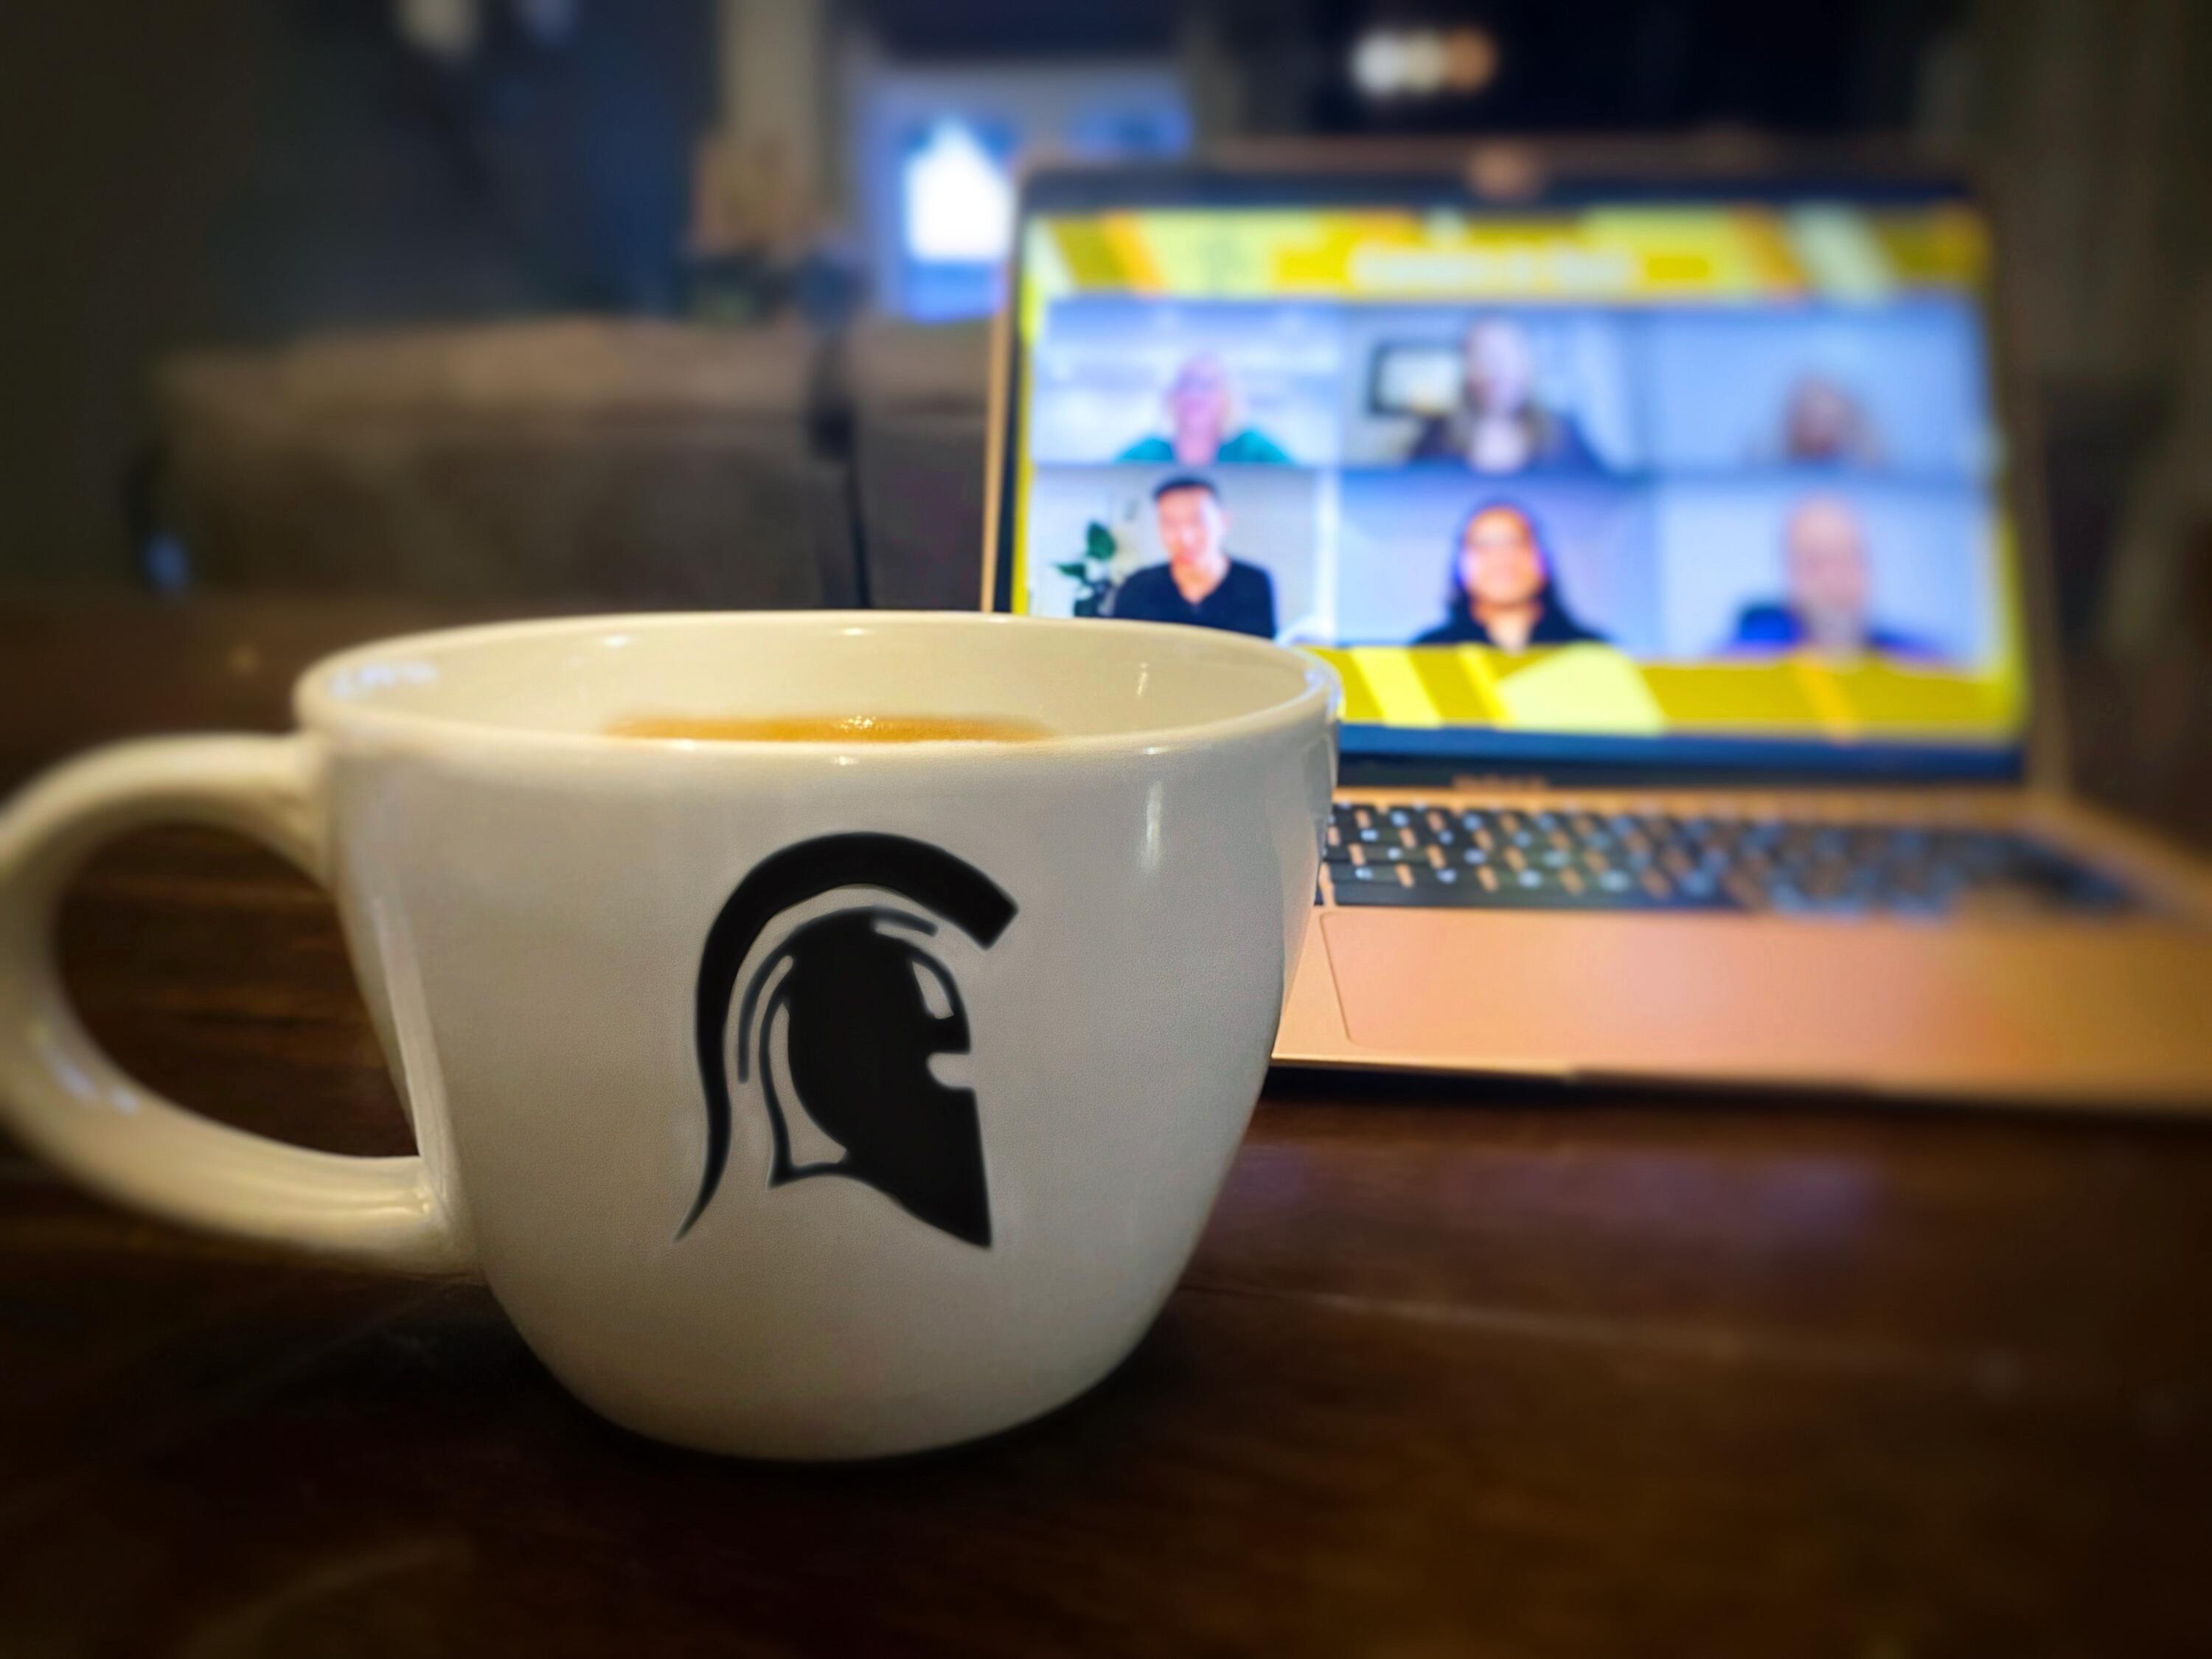 Waterloo Warriors logo mug in front of computer with Zoom call